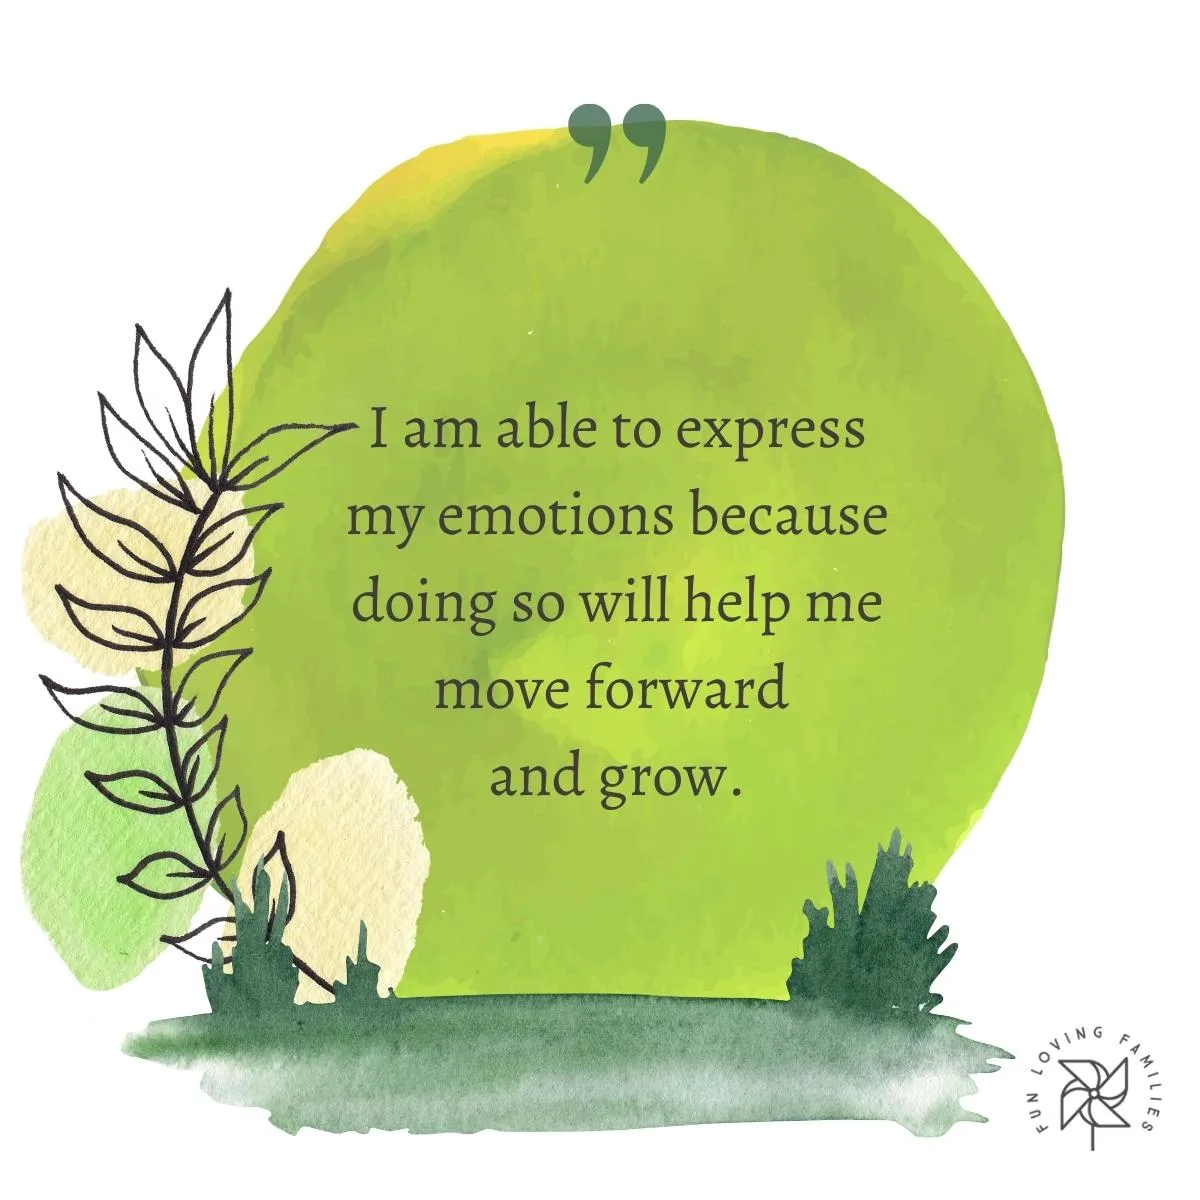 I am able to express my emotions because doing so will help me move forward and grow affirmation